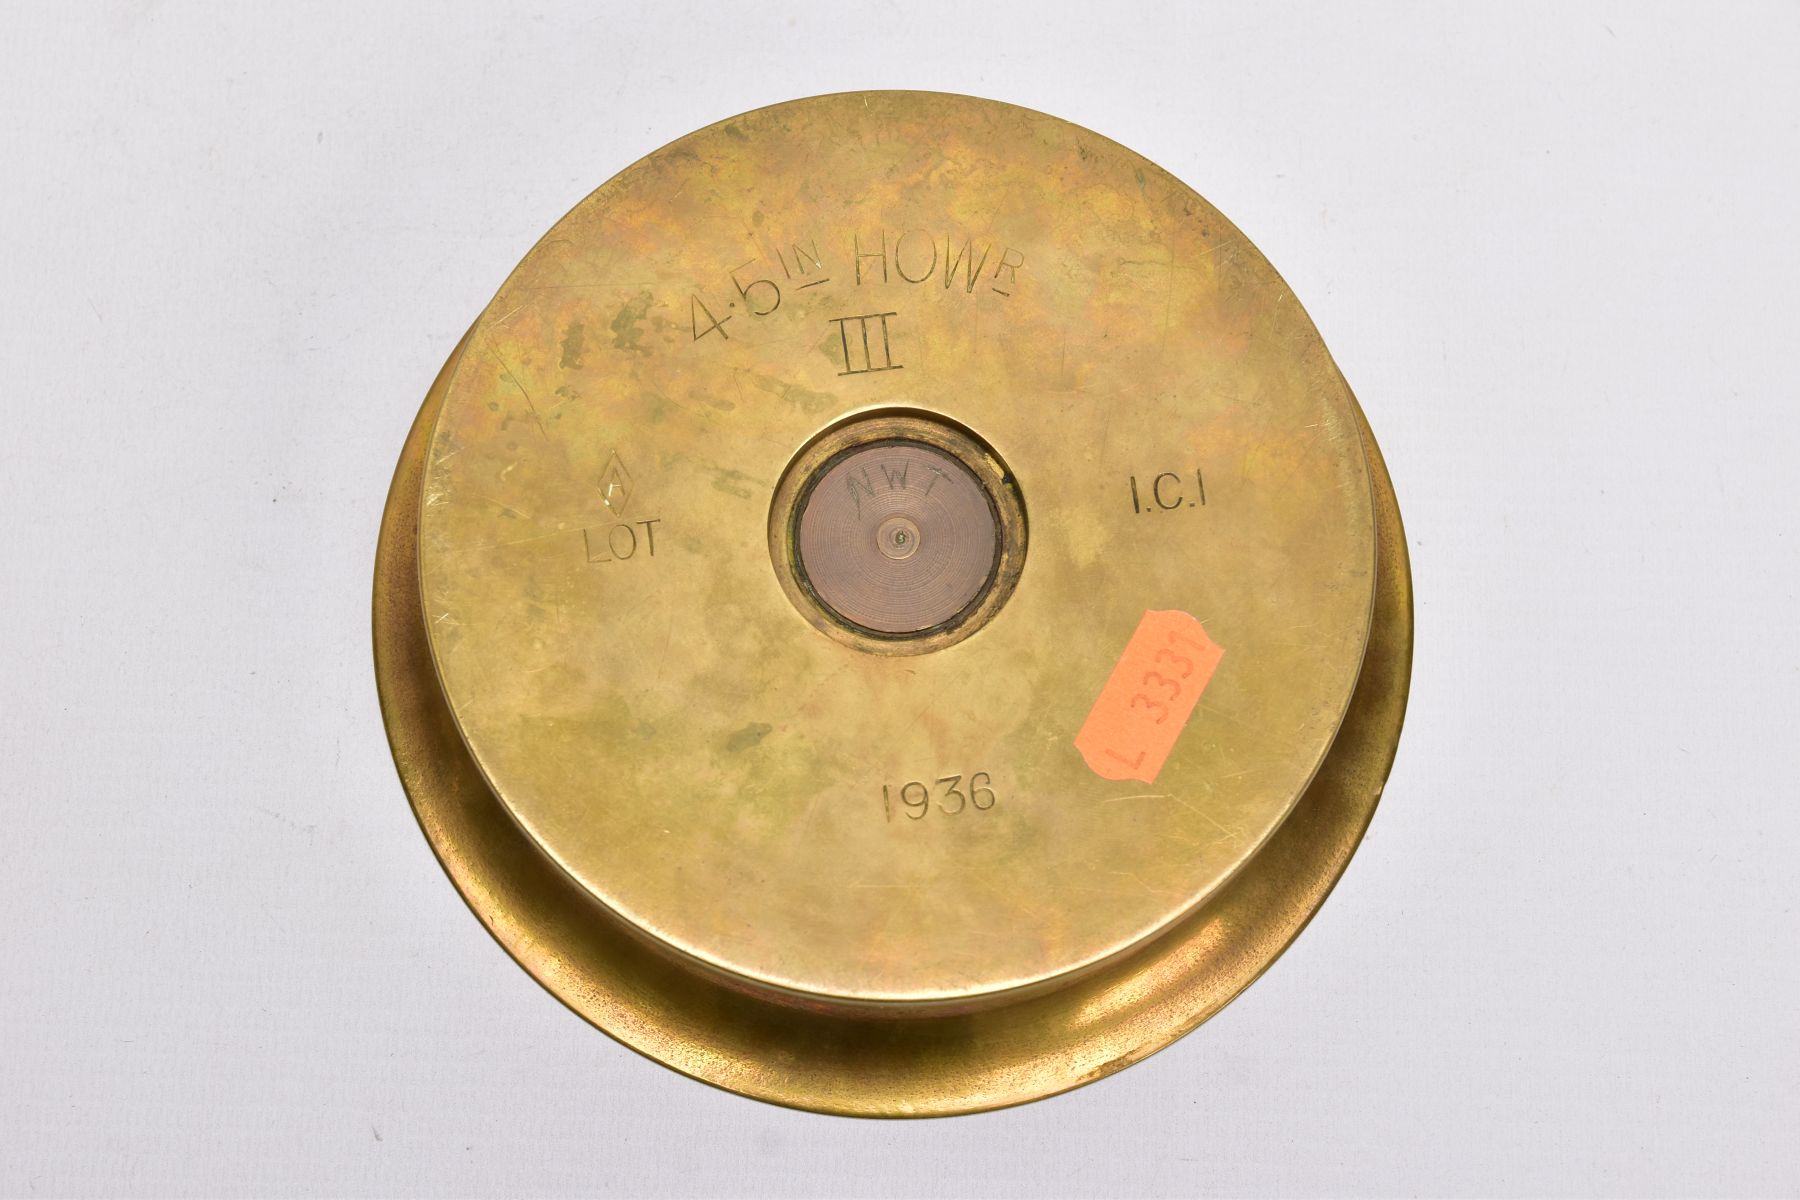 A 1936 DATED 4.5'' HOWITZER III SHELL CASE BASE, which has been fashioned into a circular ash tray - Image 3 of 4